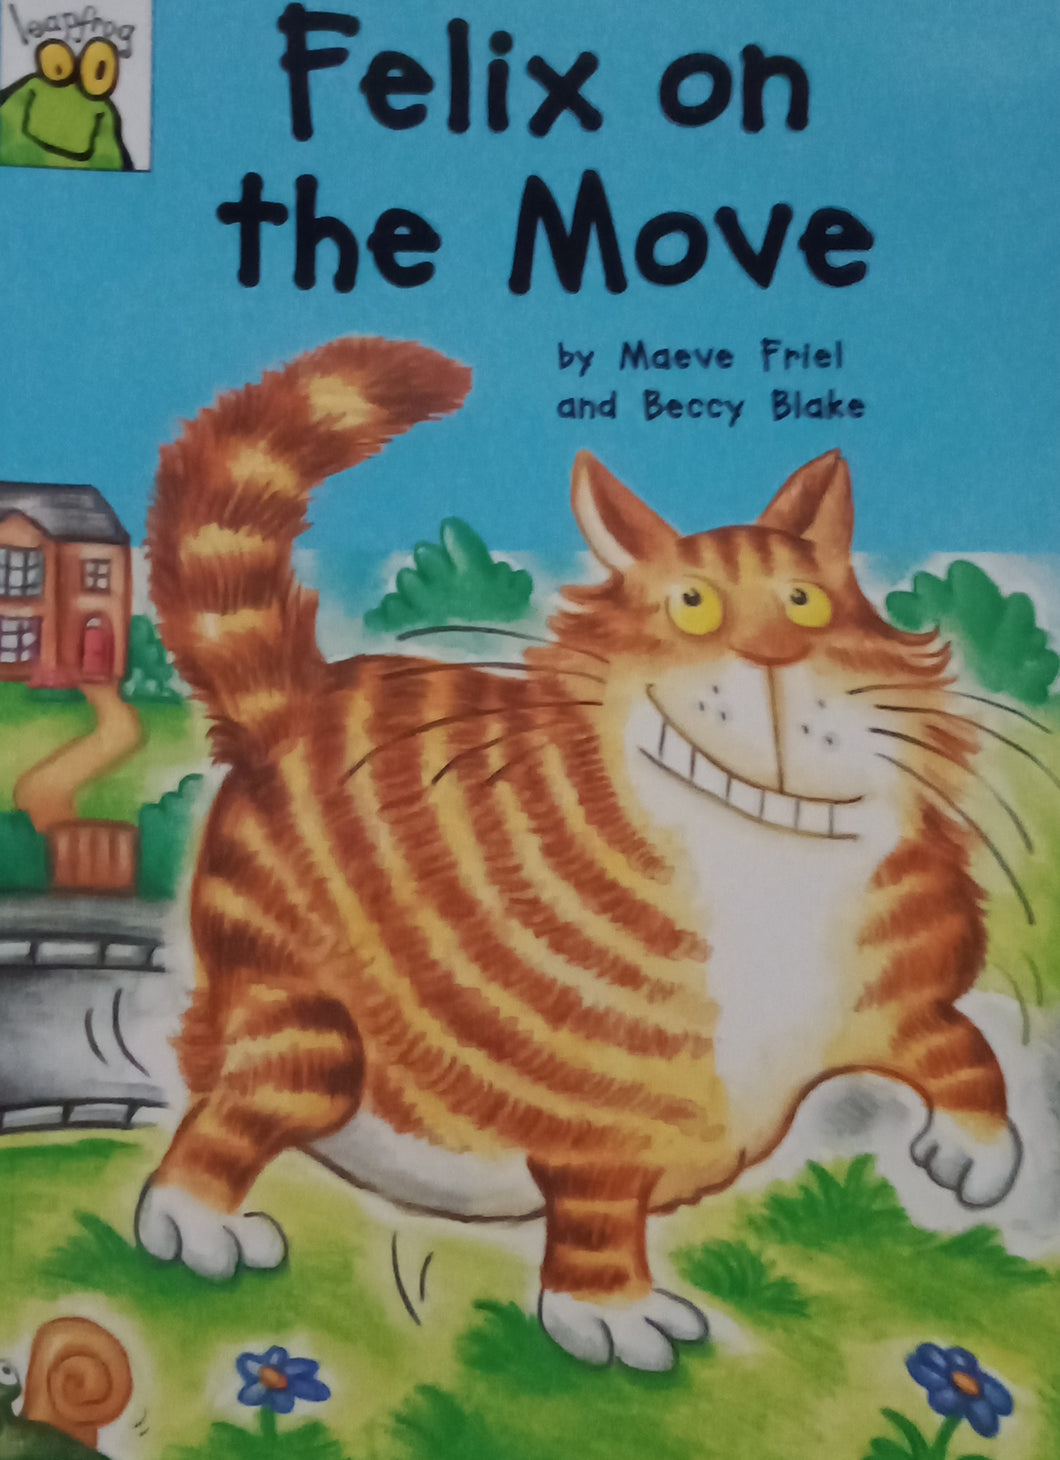 Felix On The Move by Maeve Friel